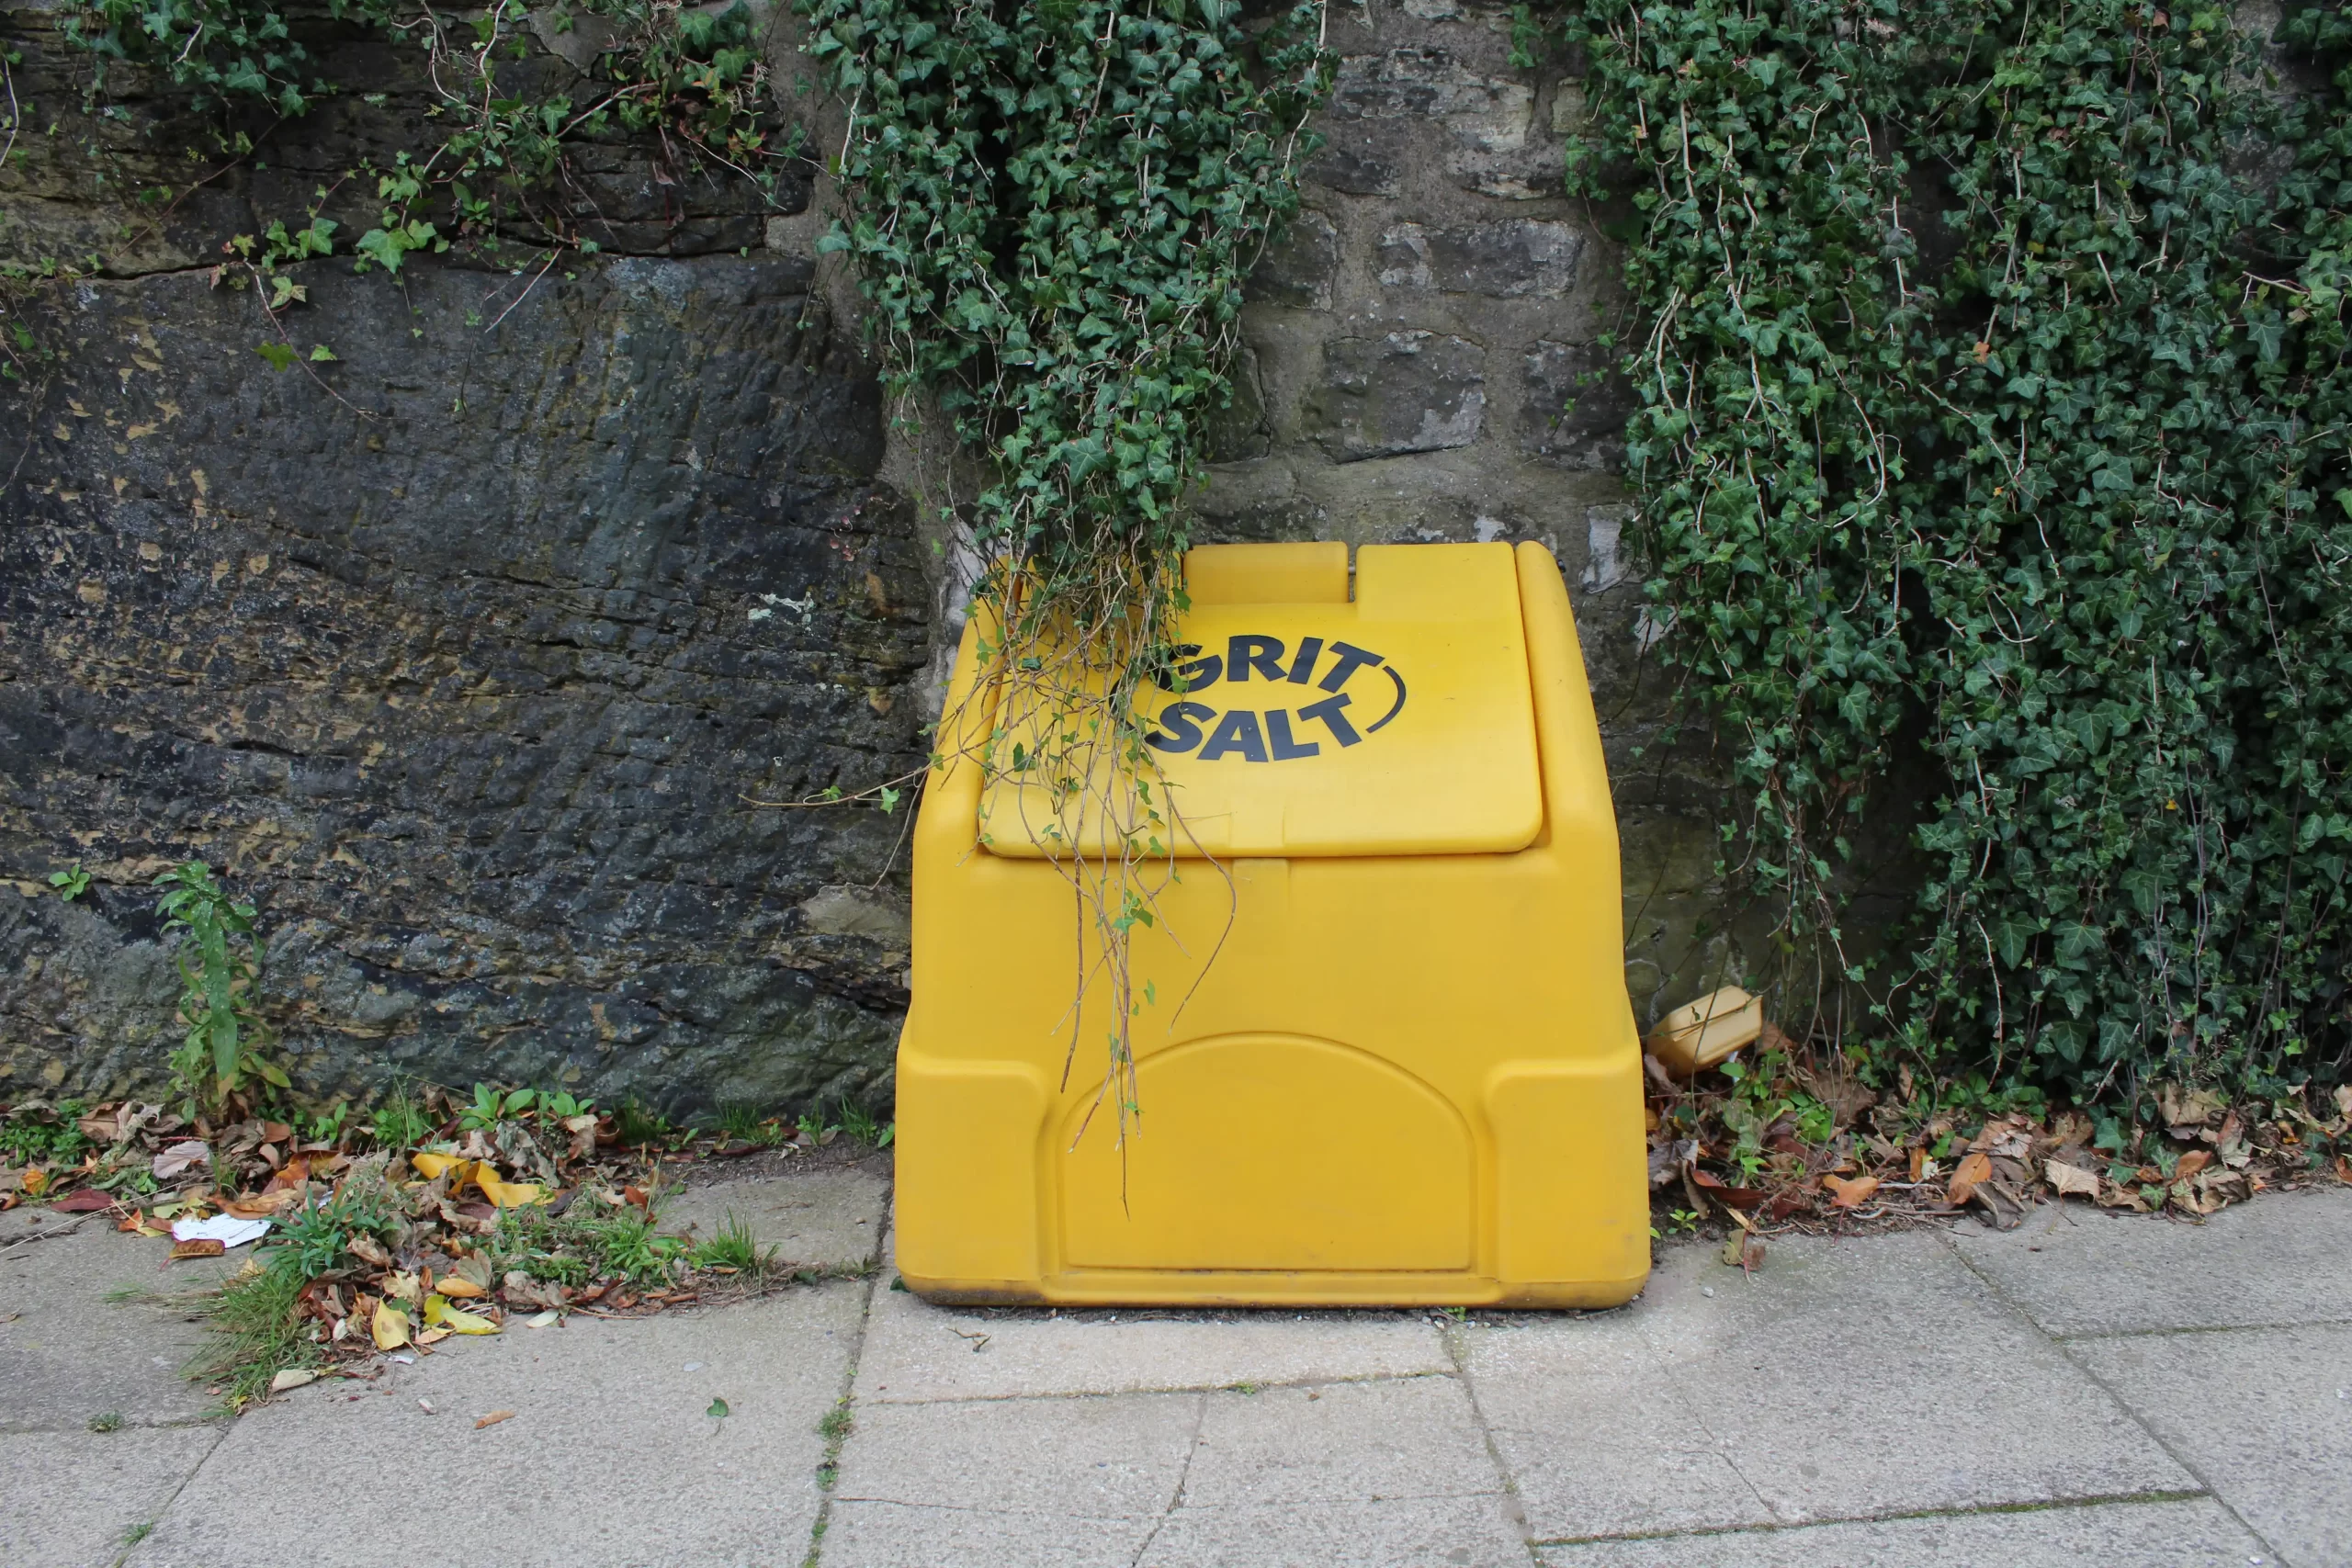 A yellow grit bin on a side walk in front of a rock wall, with green vines hanging around it.